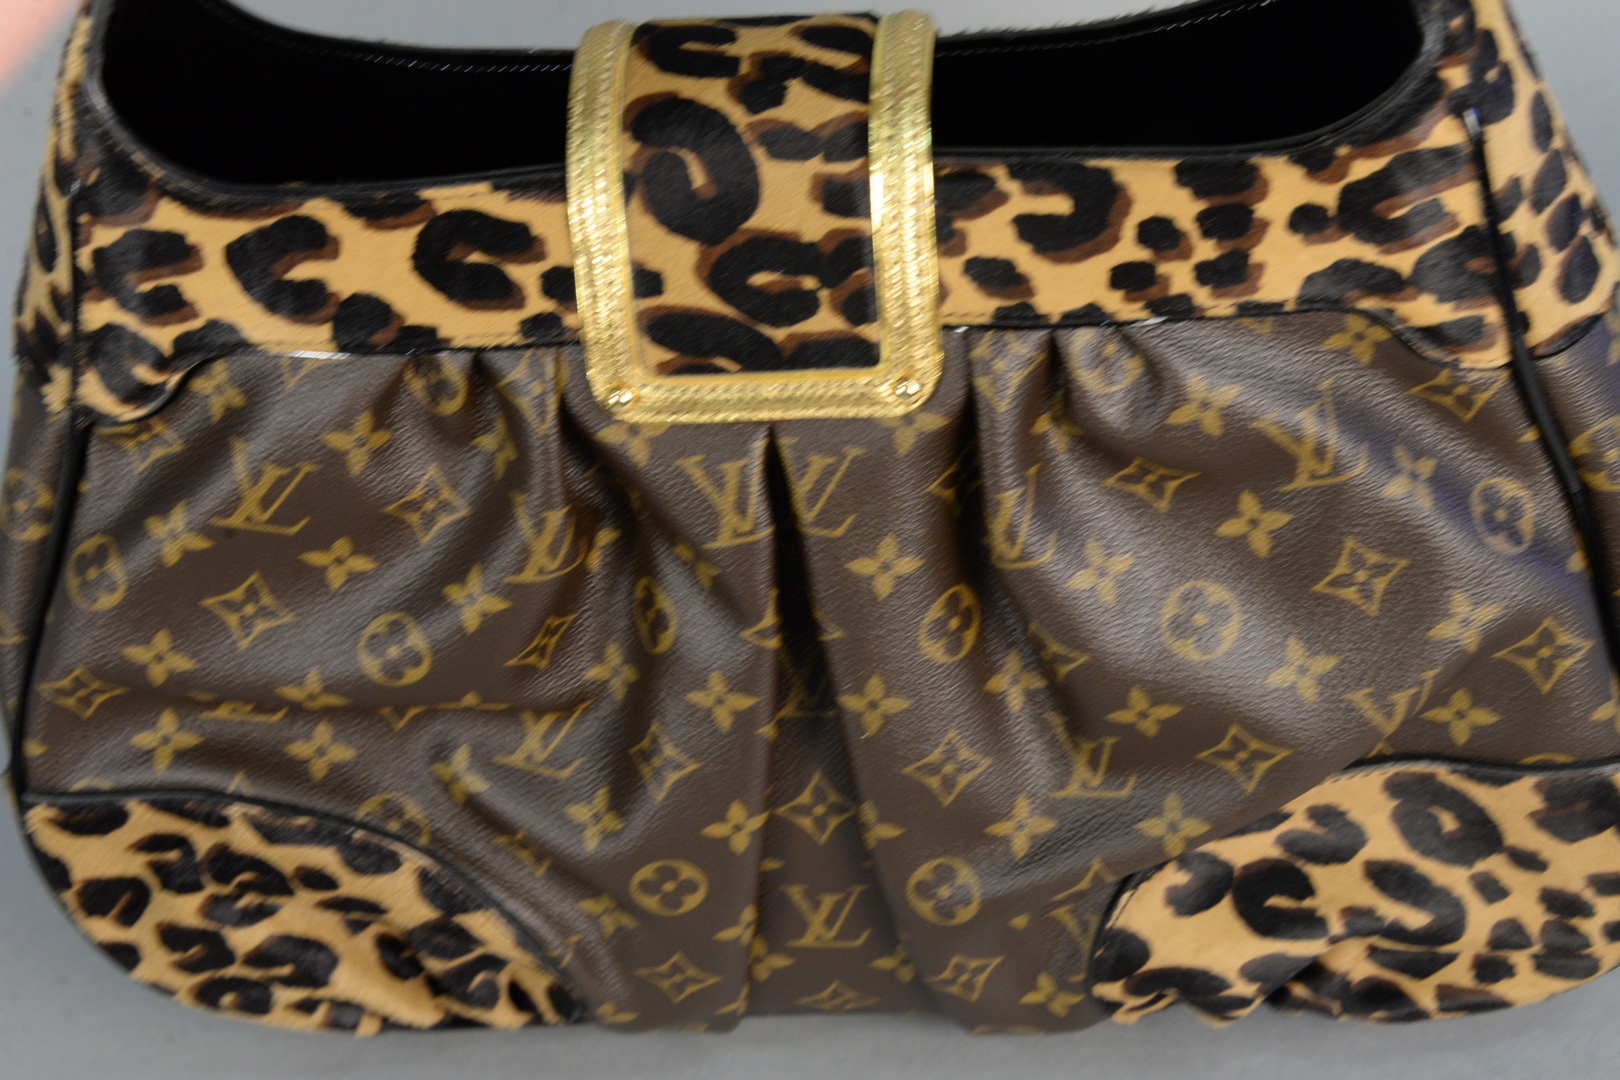 Louis Vuitton leopard print monogram handbag, 'Polly Leo' having original  box, dust bag, tags and receipt, new price $3,940. sold at auction on 26th  September